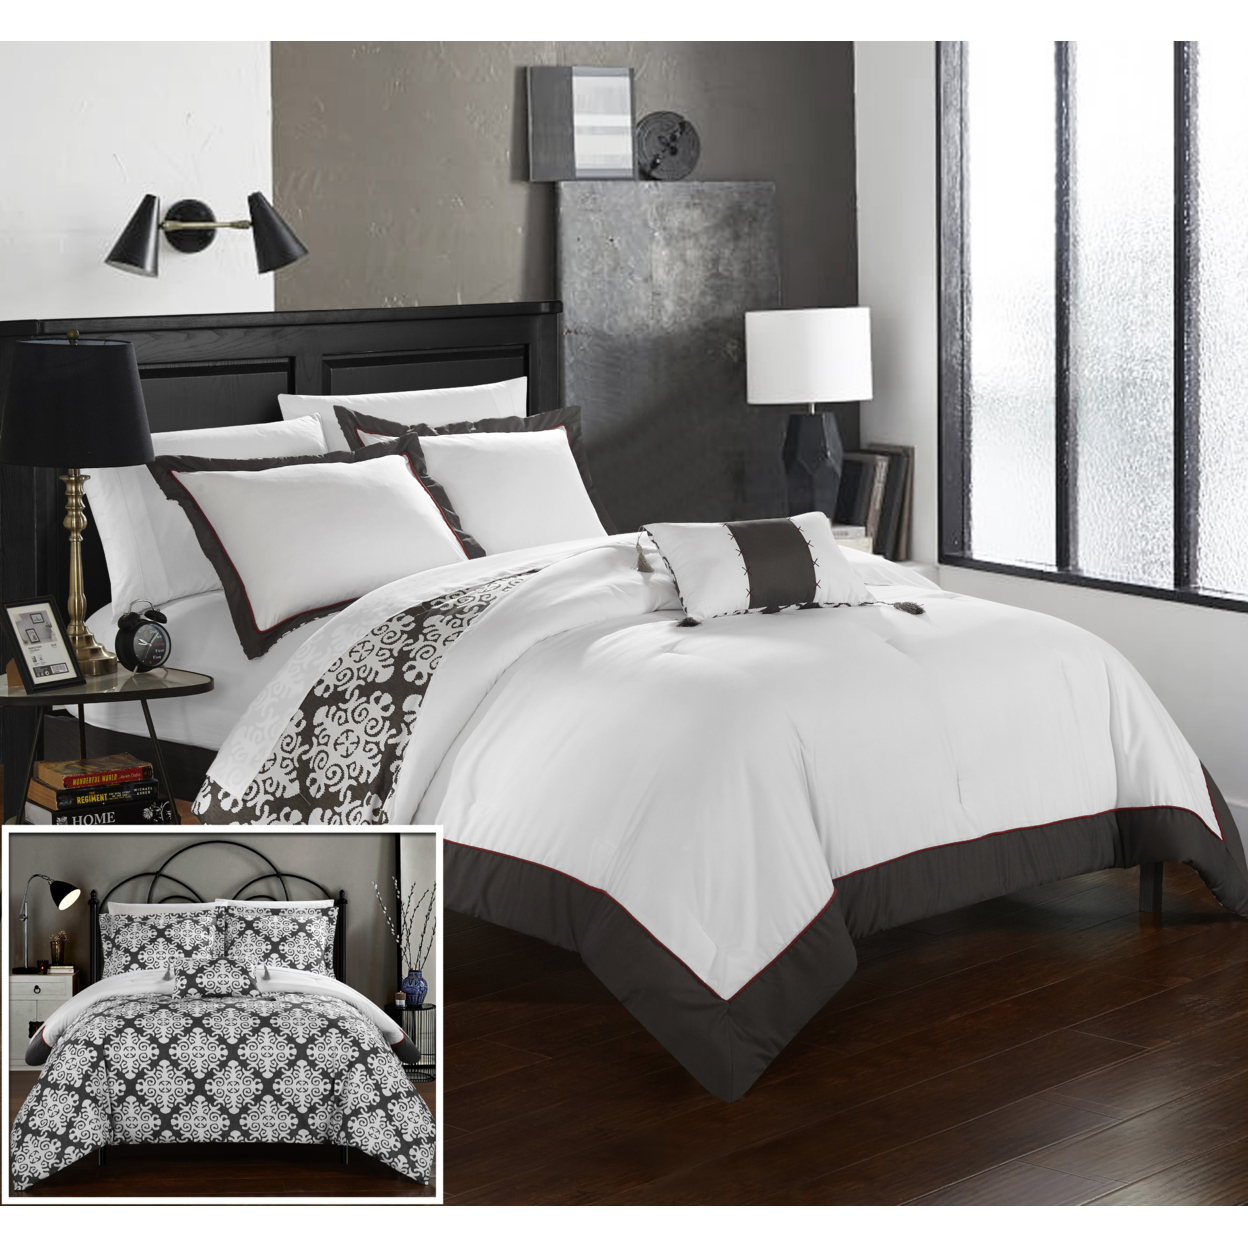 Chic Home 3/4 Piece Mallow Black And White REVERSIBLE Medallion Printed PLUSH Hotel Collection Duvet Cover Set - Grey, Queen